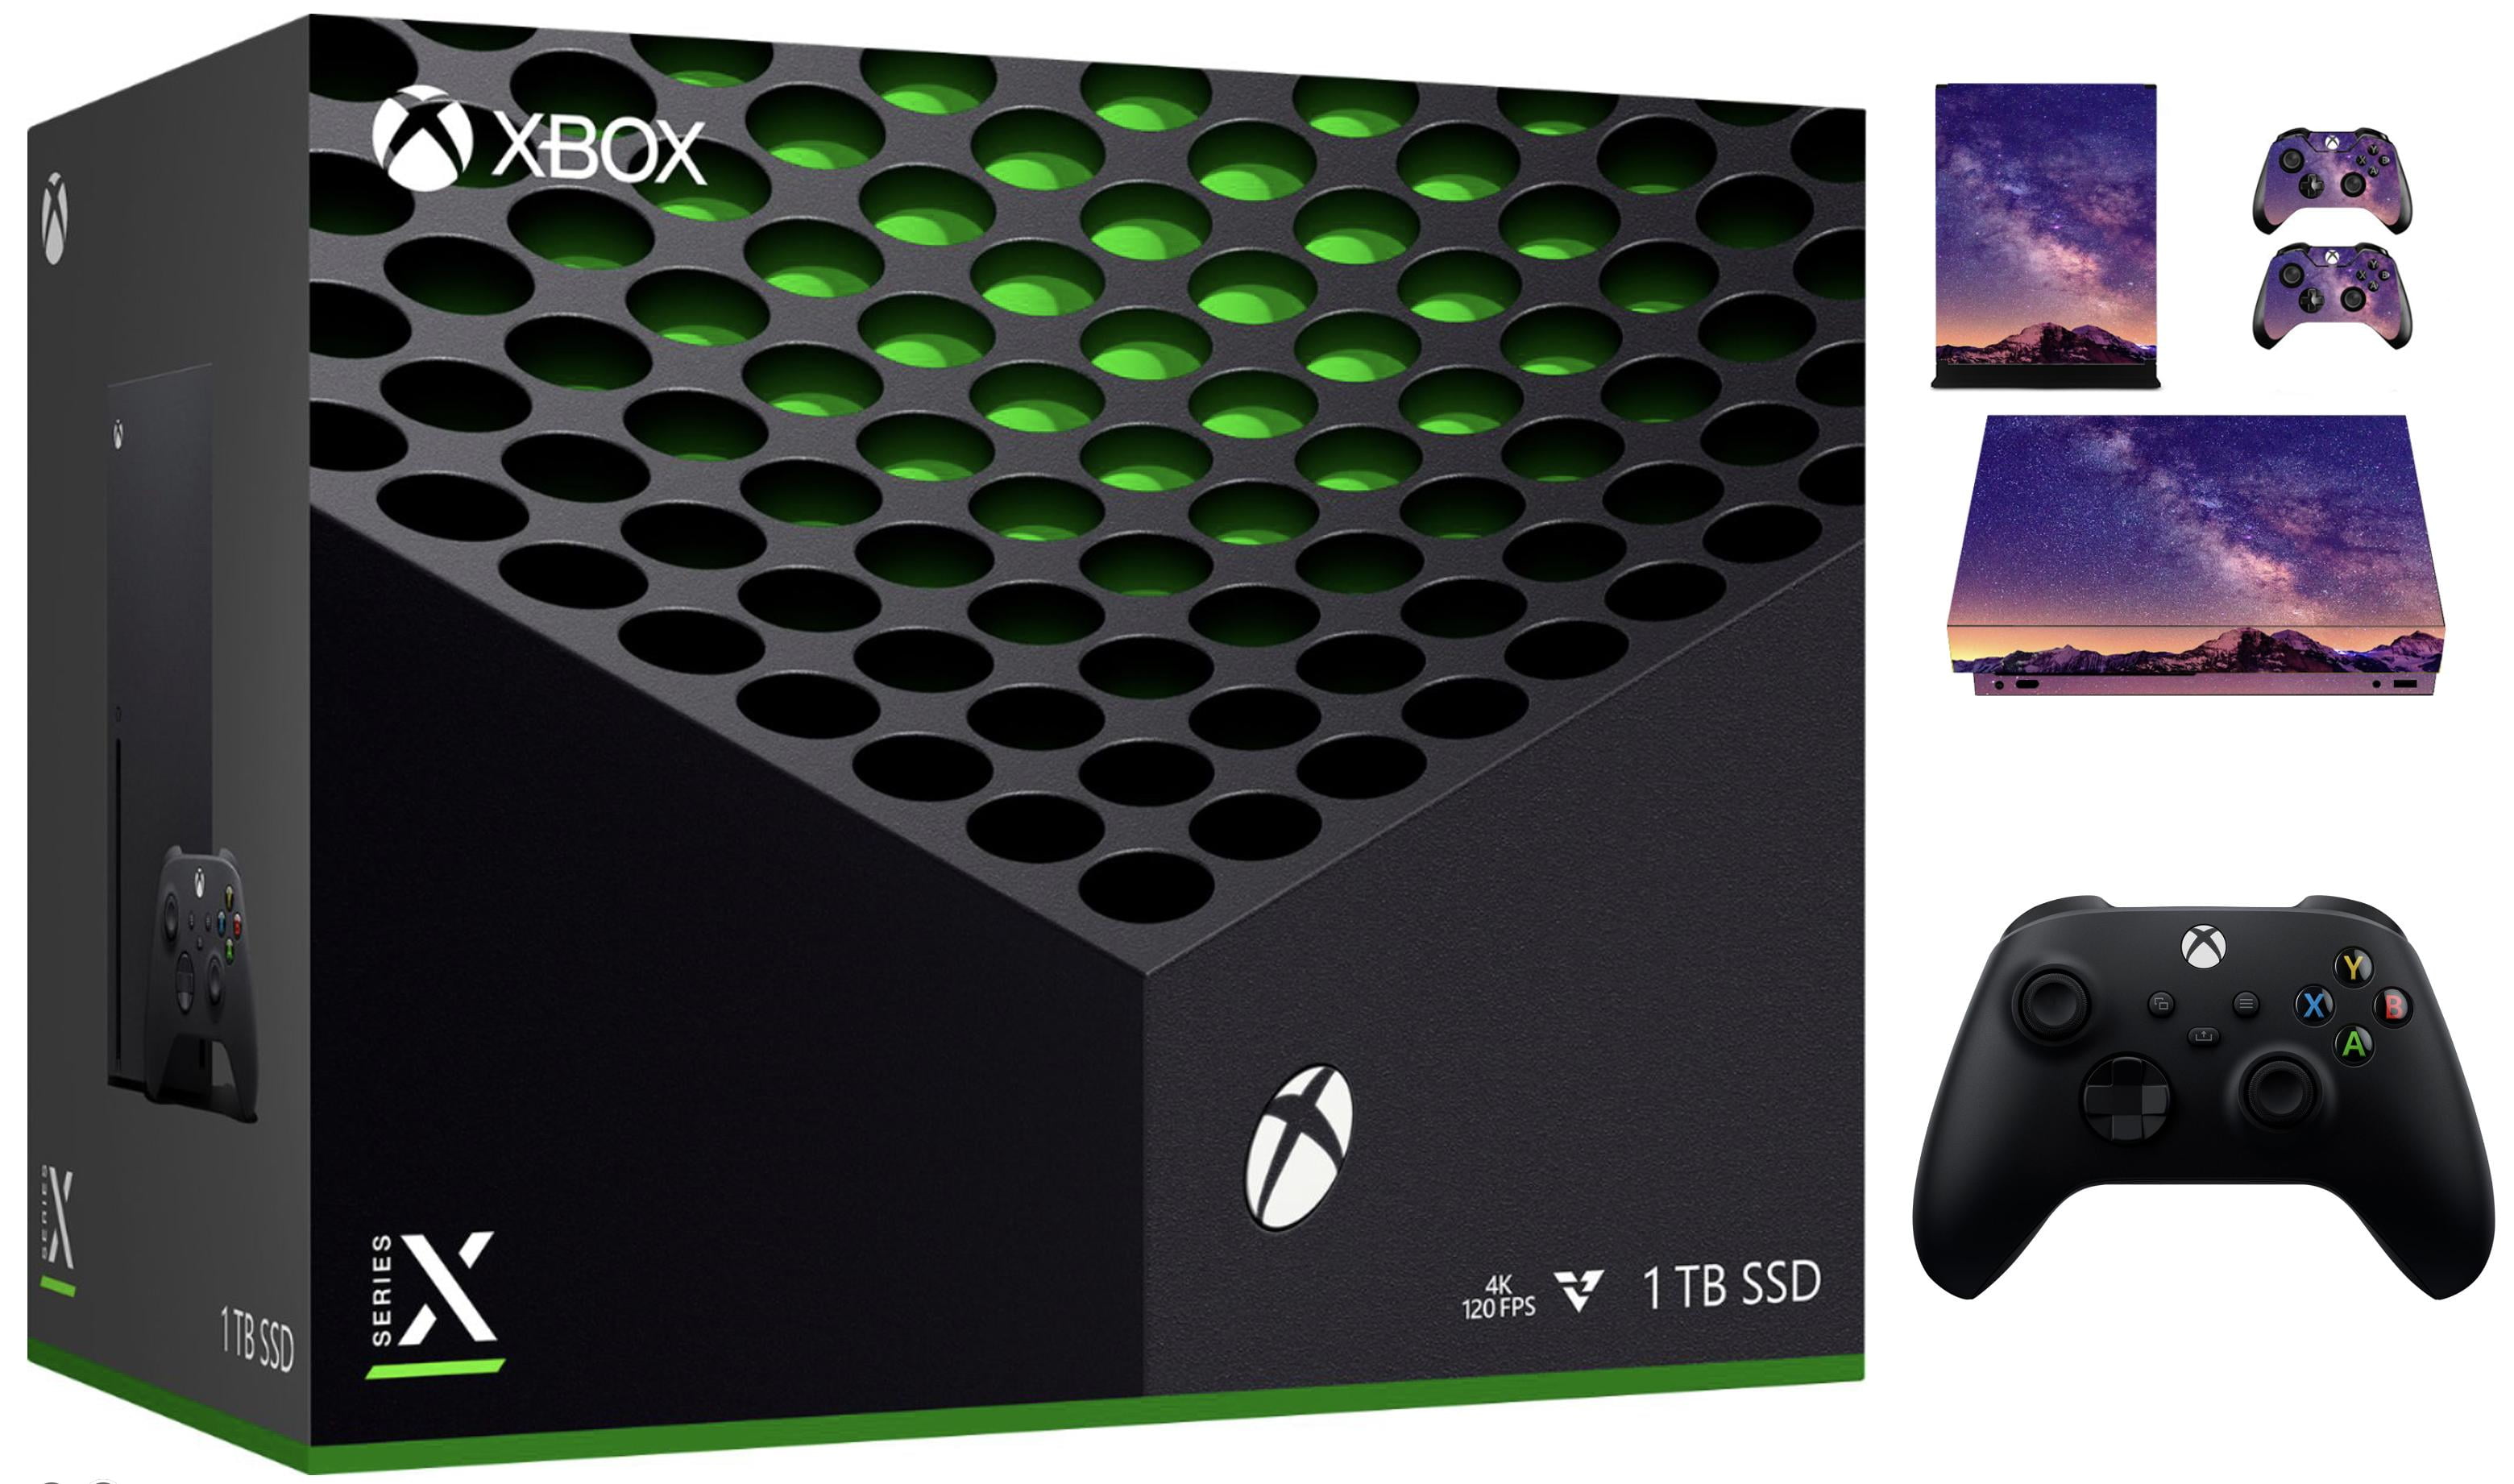 rand Boomgaard Zelfrespect Xbox Series X Disk Version, 1TB SSD, 4K gaming, 8K HDR, Up to 120FPS -  Walmart.com